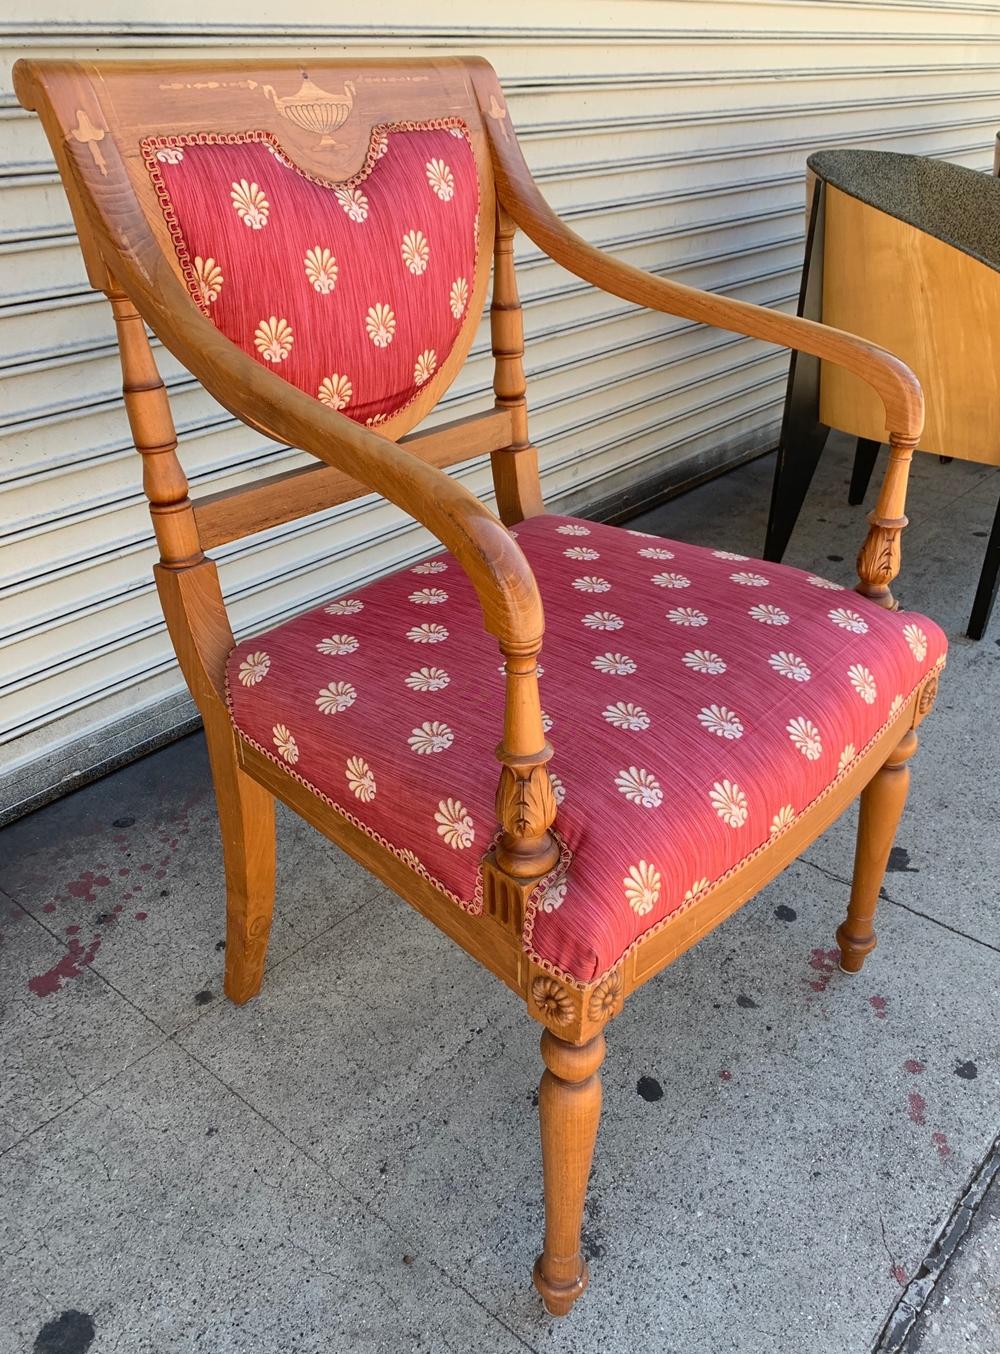 2 Antique Armchairs with Parquetry Inlay by Rossita In Fair Condition For Sale In Los Angeles, CA